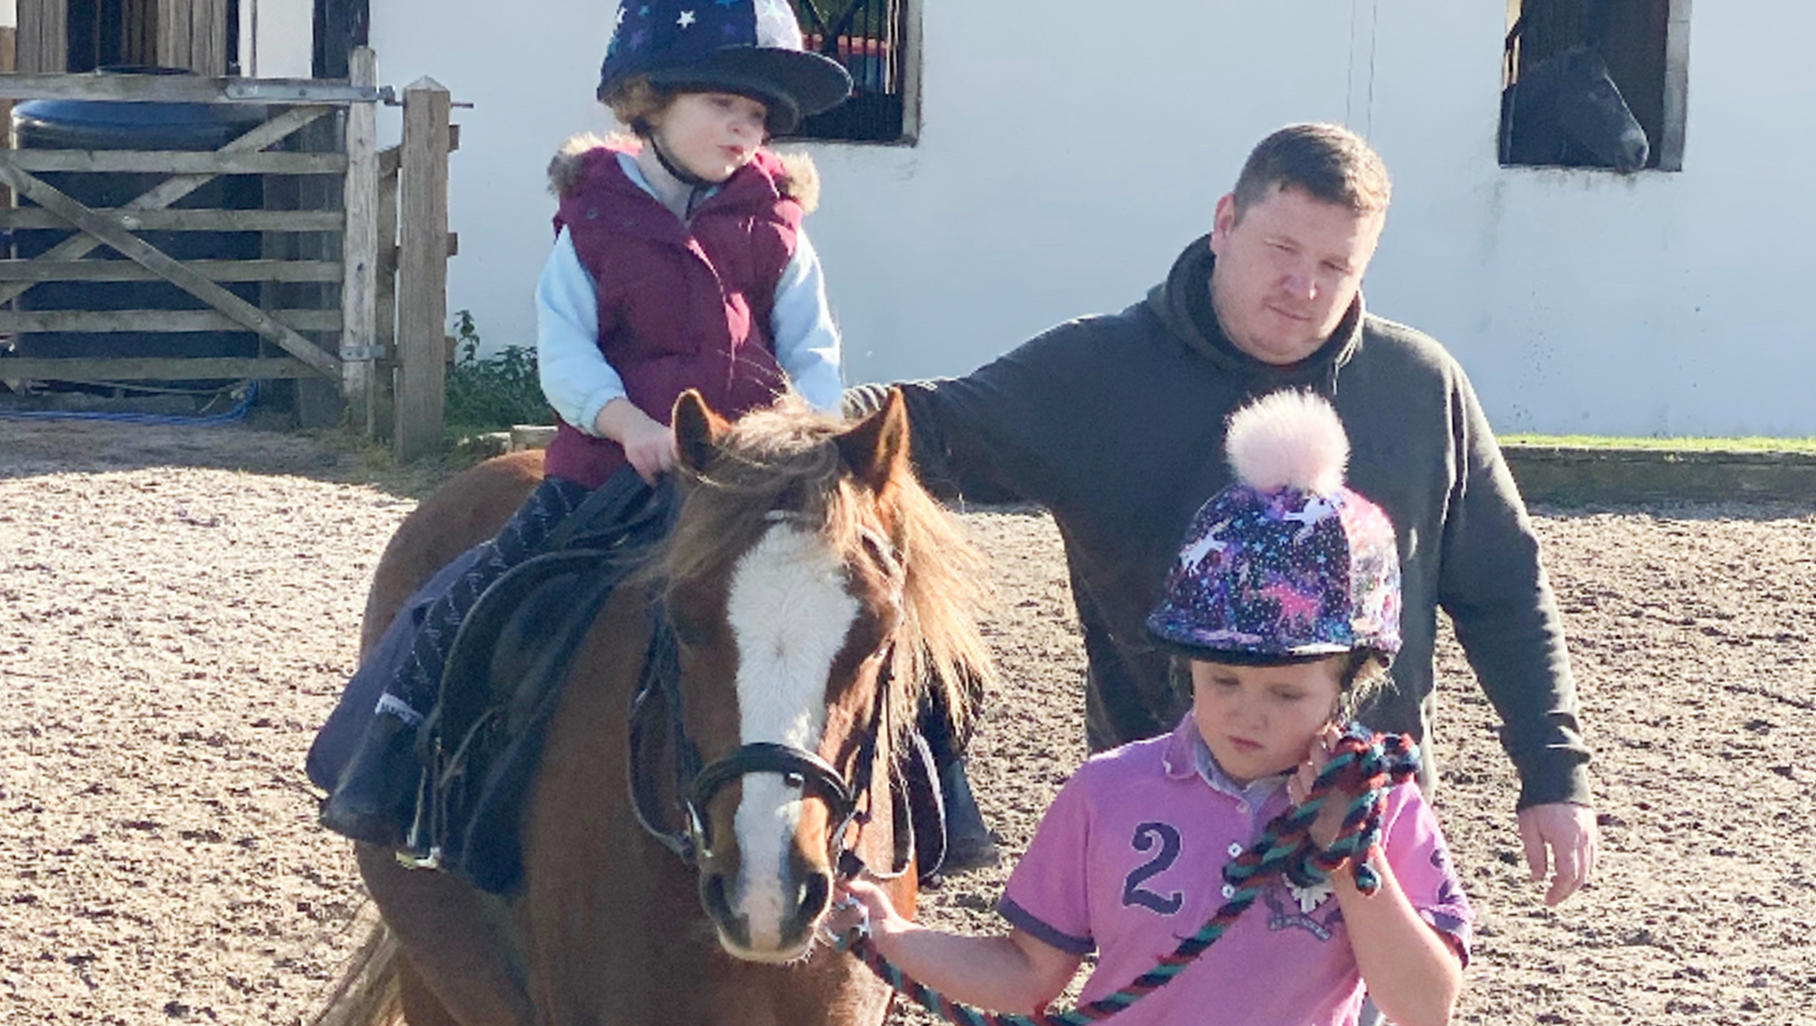 CATERS - (PICTURED: Crystal, 8, and Hallie, 3, at horse riding school).Meet the couple who are happy to label themselves Britain's pushiest parents - who say they'll stop at nothing to see their kids succeed. Sophie and Phil McGennity are determined